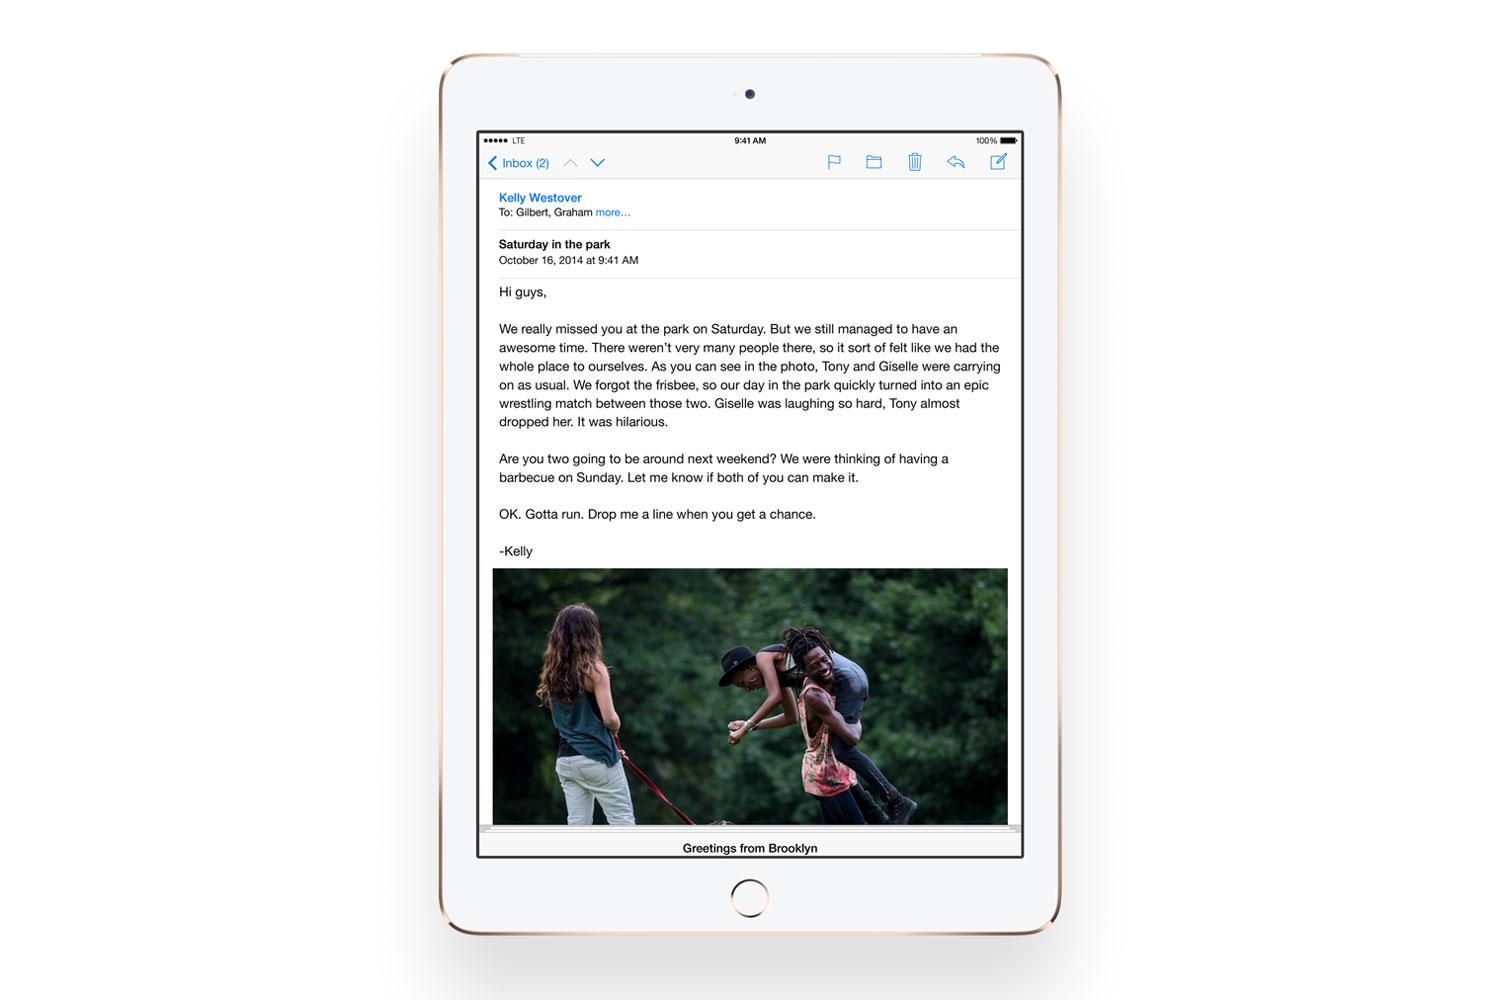 apple ipad air 2 mini 3 launch event news email press image